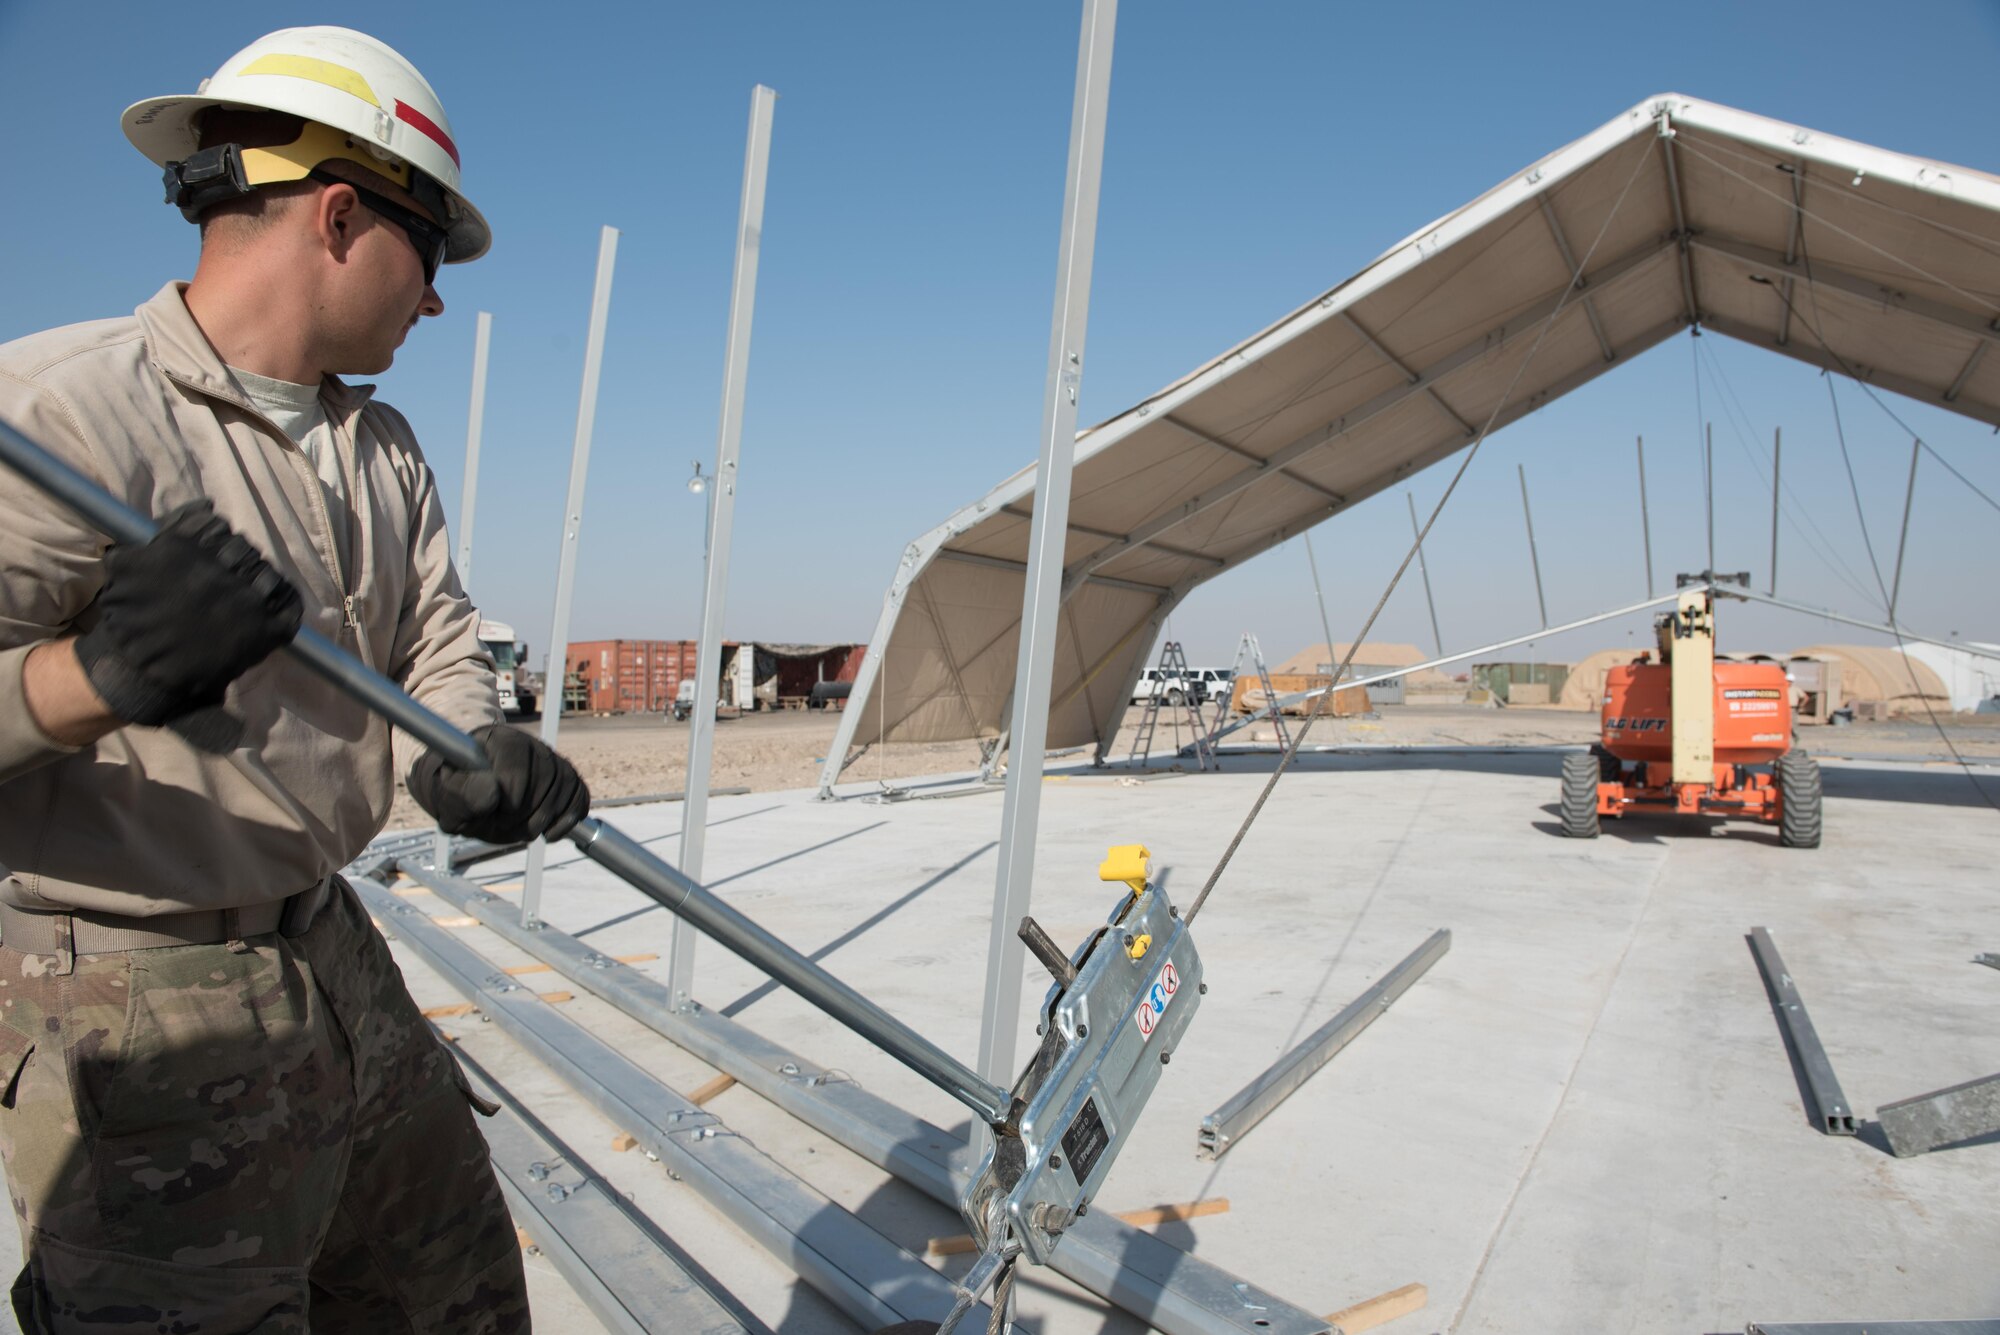 Staff Sgt. Ryan Mendenhall, 577th Expeditionary Prime Beef Squadron electrical systems specialist, increases the tension on a pulley to raise the arch of a 4K dome at the 407th Air Expeditionary Group, March 21, 2017. Mendenhall was part of a team, which forward deployed to assist the 407th Expeditionary Civil Engineer Squadron with erecting large structures on base.  (U.S. Air Force photo/Master Sgt. Benjamin Wilson)(Released)